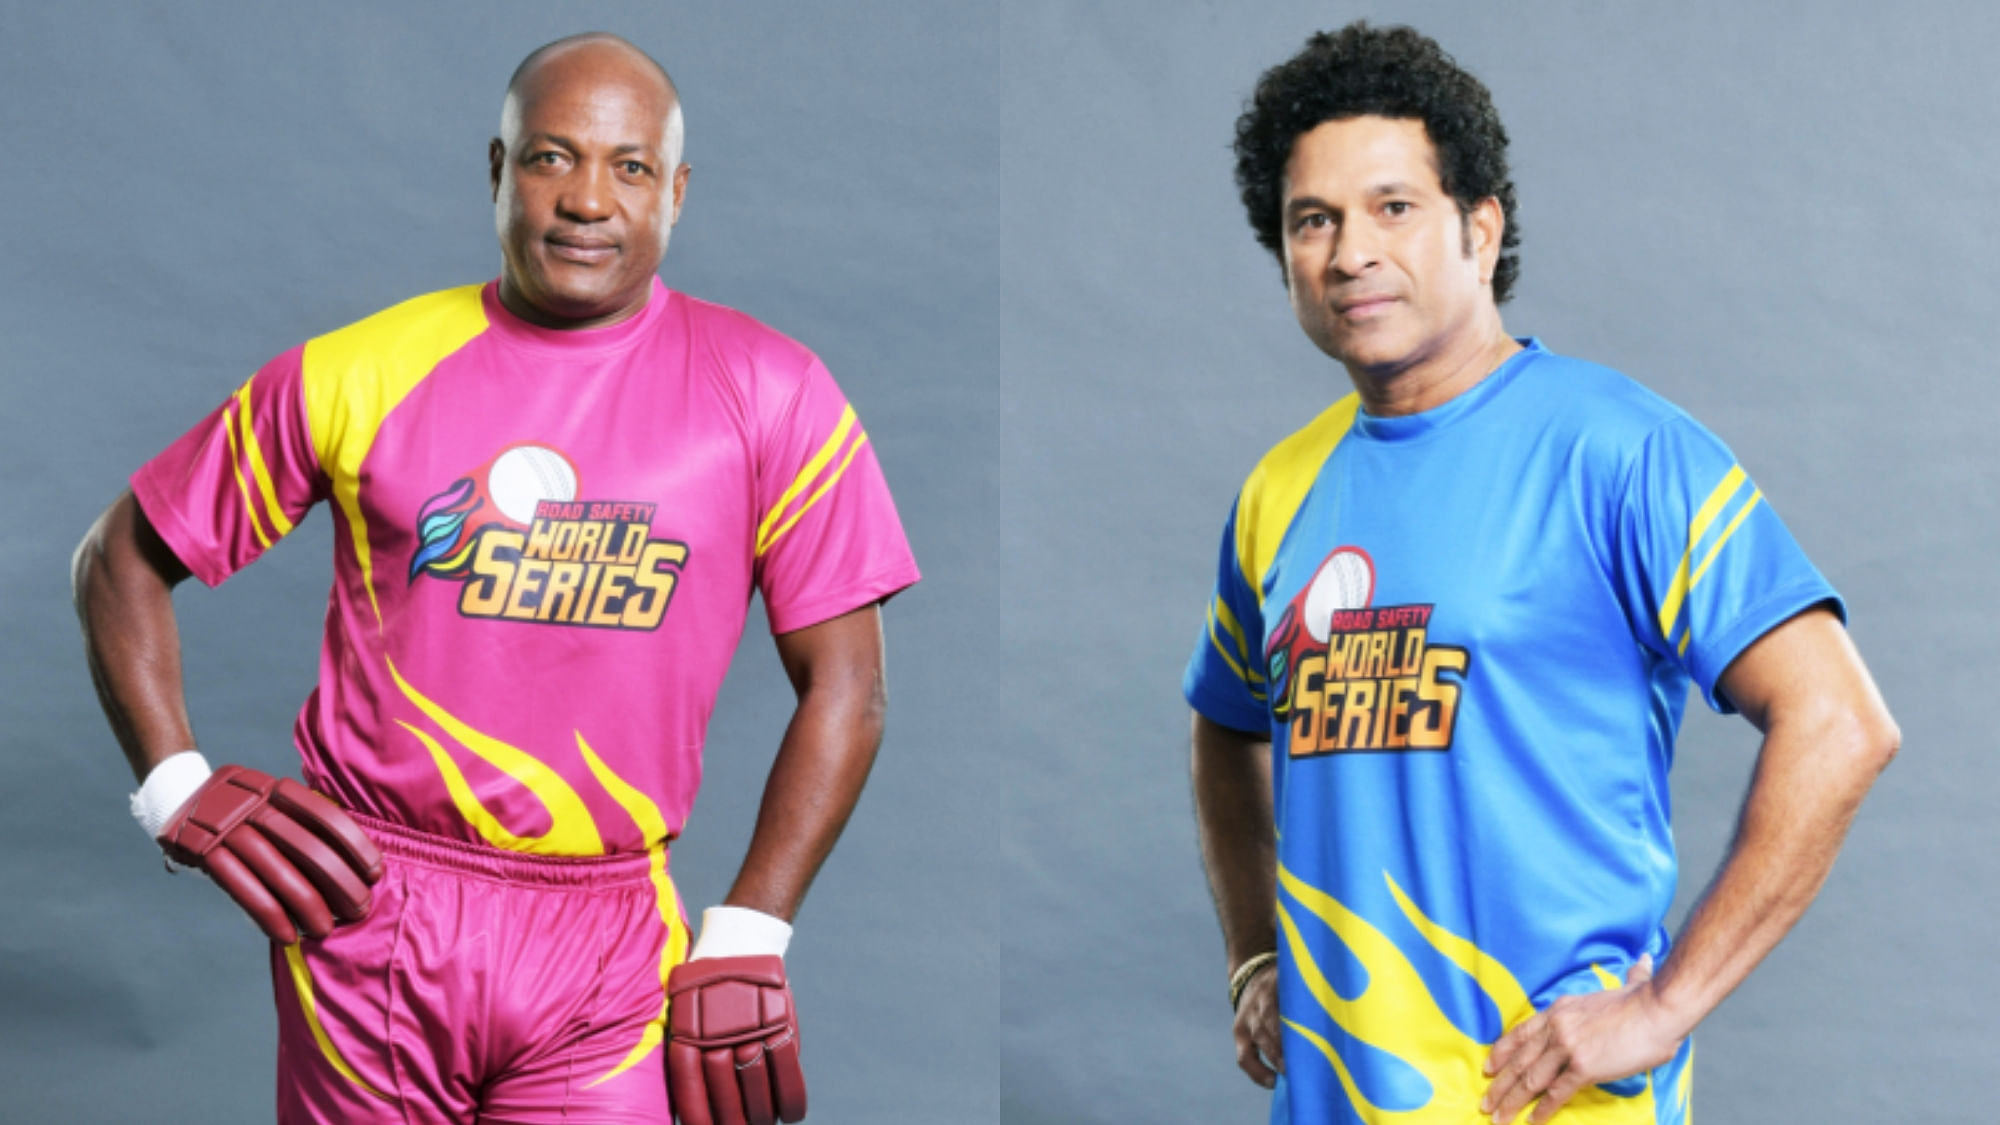 Sachin Tendulkar’s India Legends will take on Brian Lara’s West Indies Legends in the opening match on 7 March.